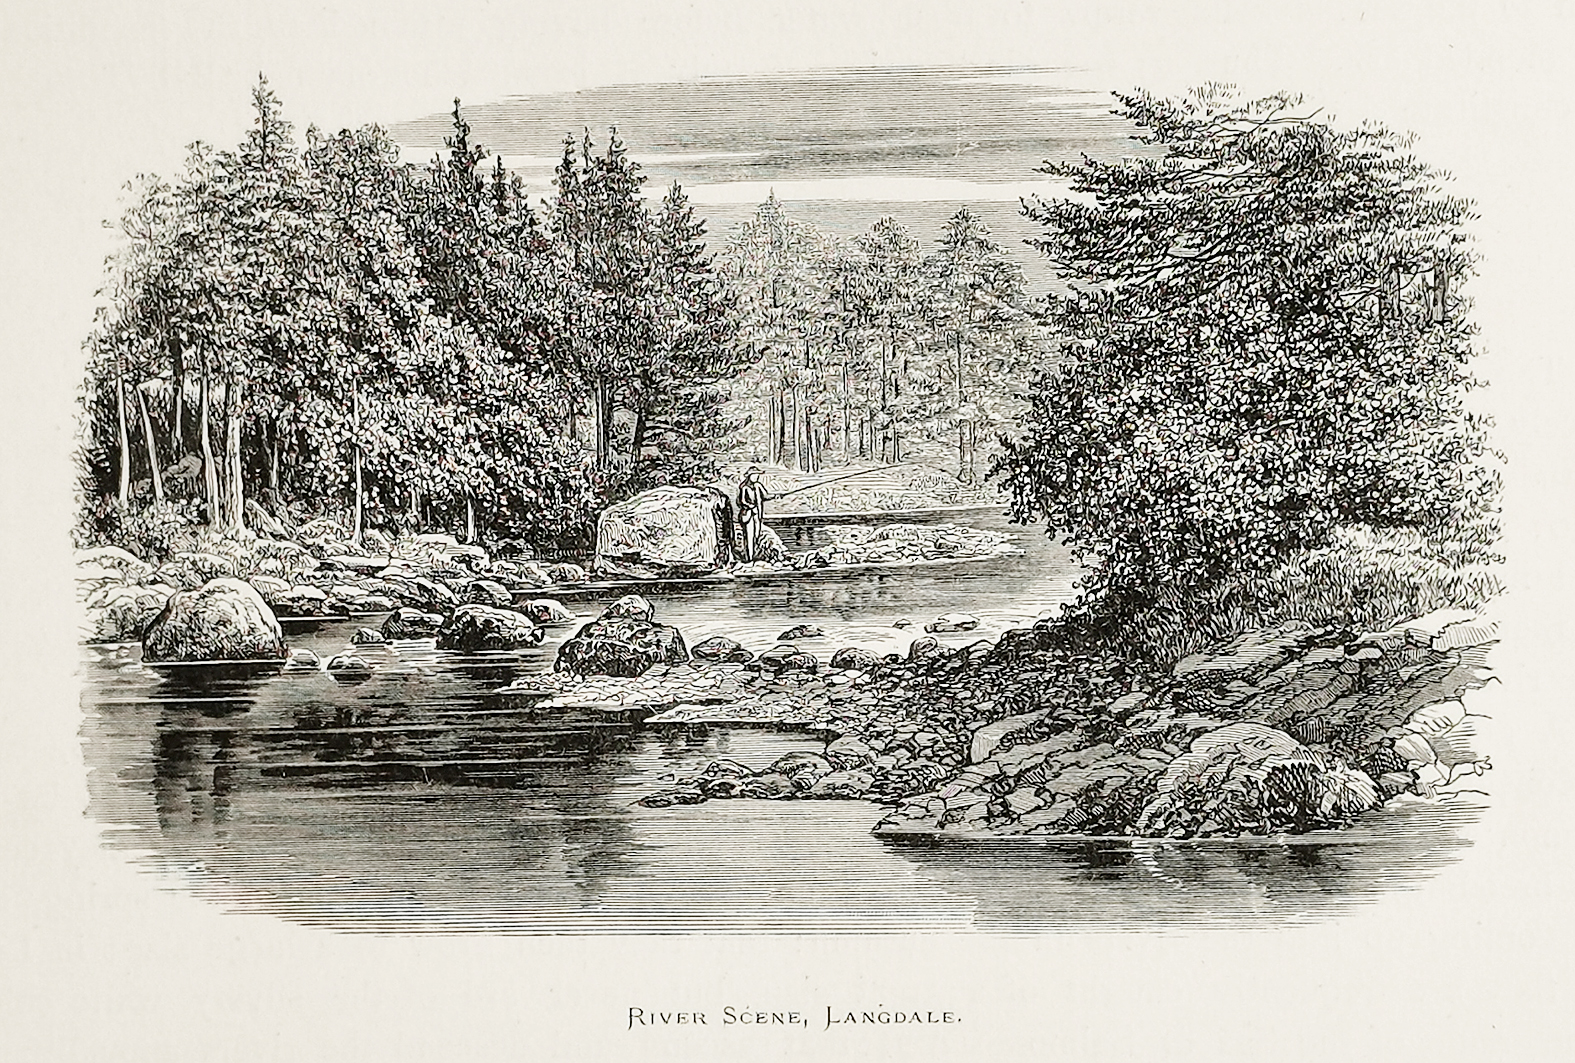 River scene, Langdale. - Antique Print from 1878